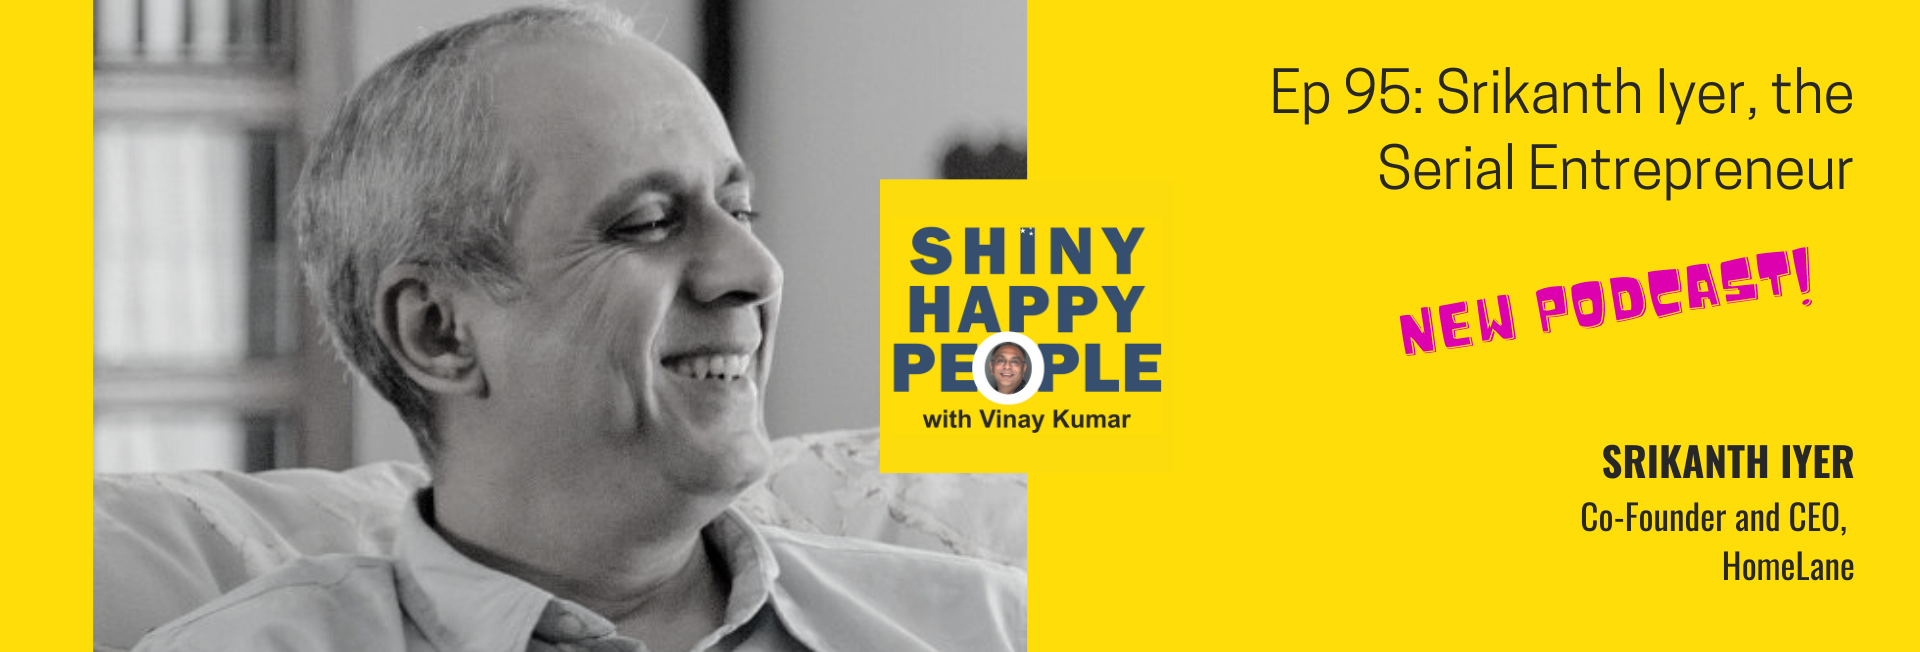 Shiny Happy People Weekly Podcast